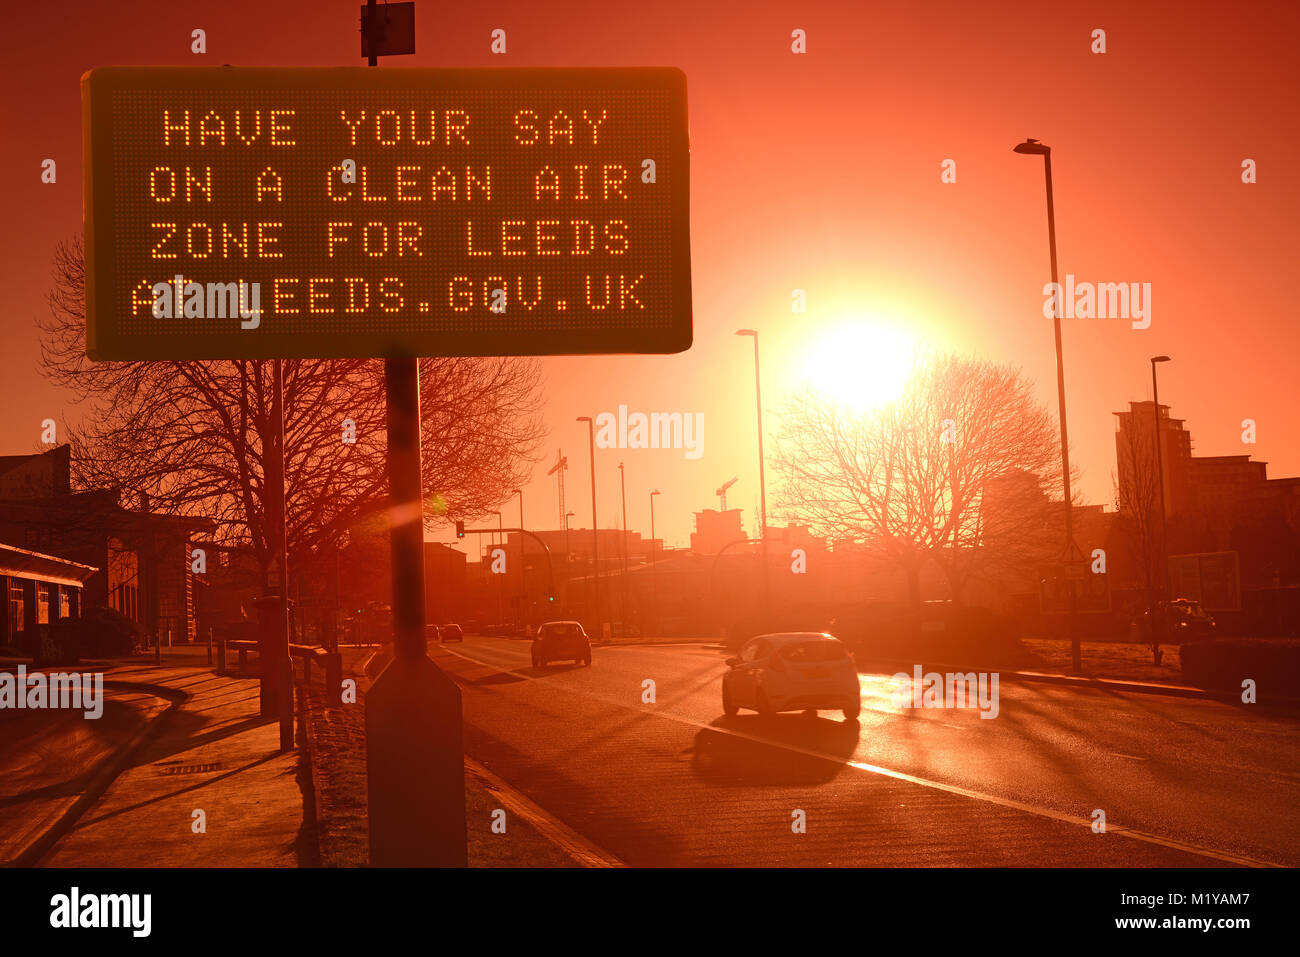 traffic passing digital advert asking for public consultation on a clean air zone for leeds city centre yorkshire united kingdom Stock Photo